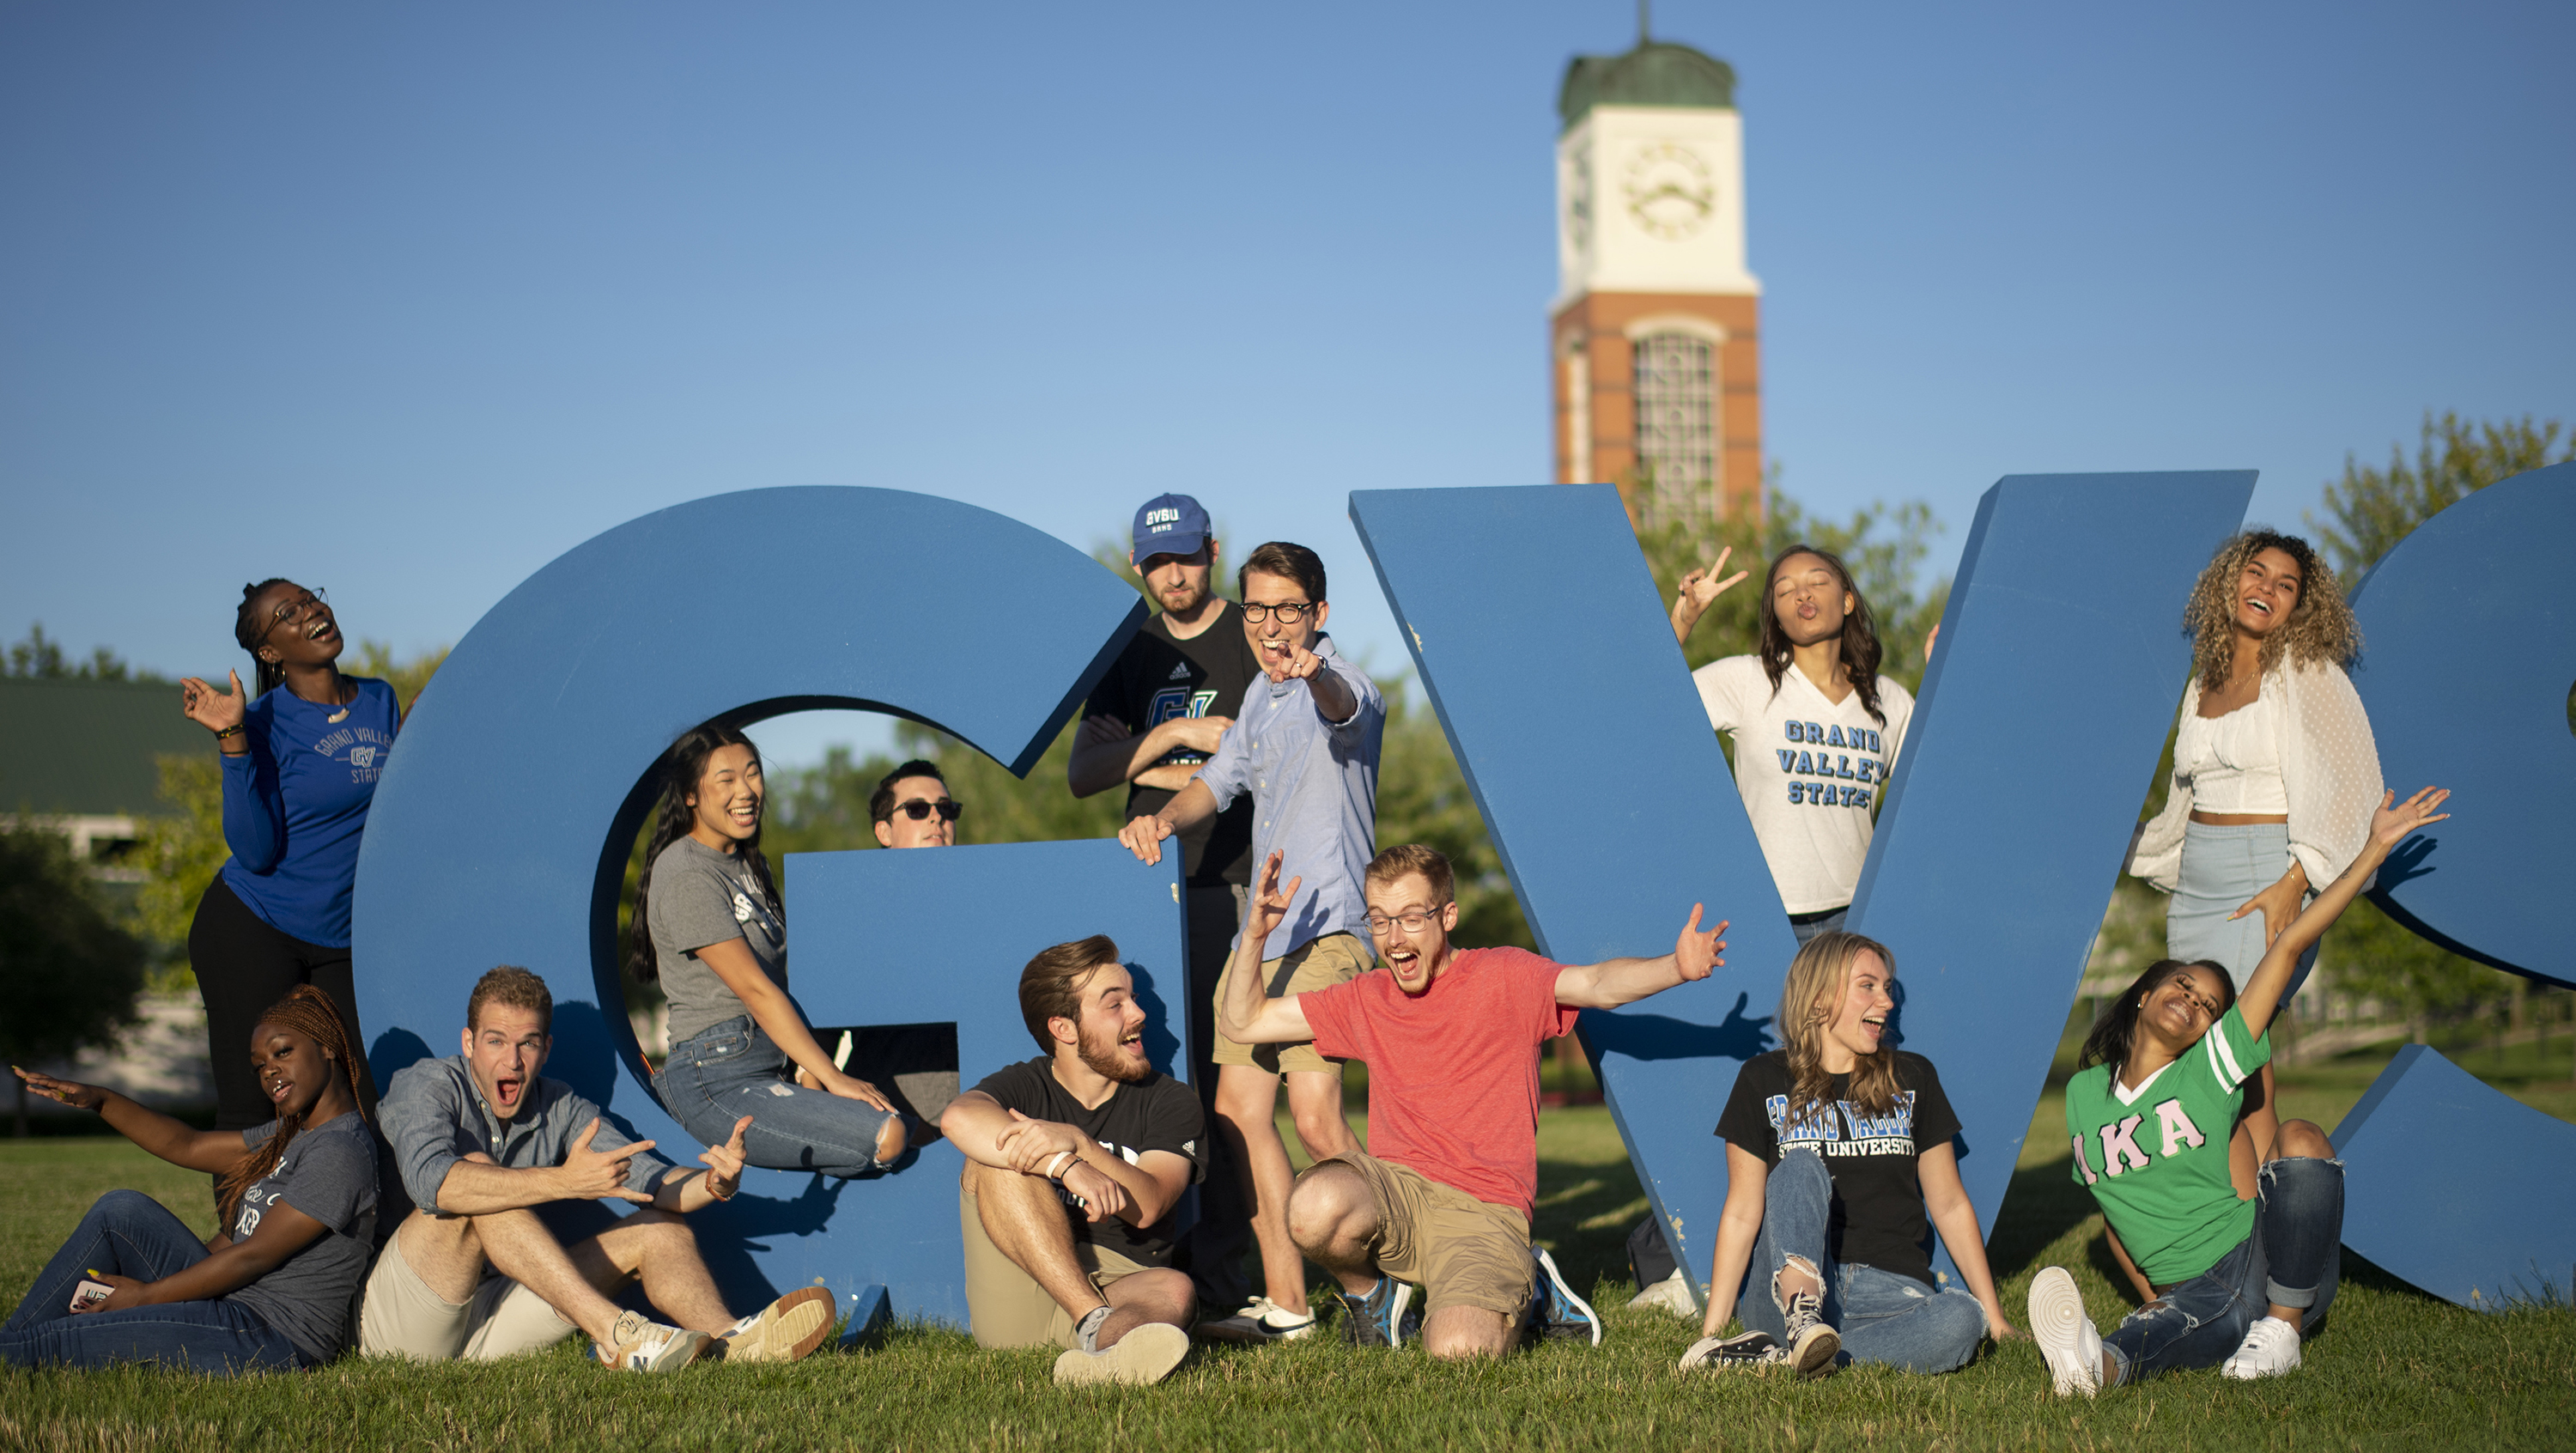 student next to the GVSU letters